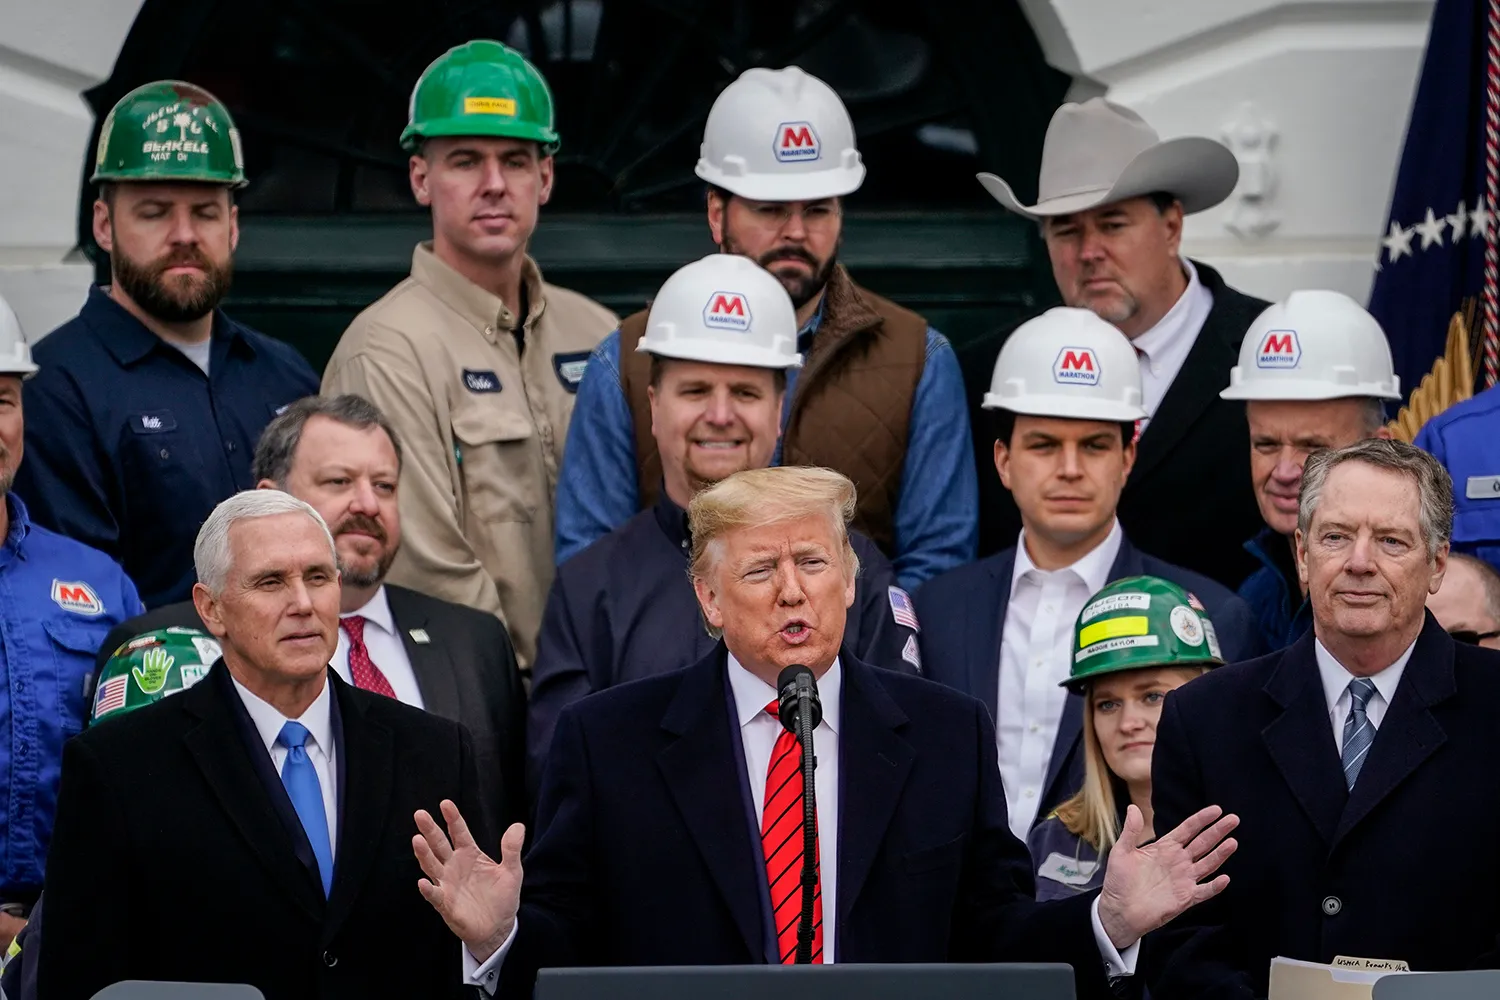 Men and a woman in hardhats and one man in a cowboy hat stand behind Pence, Trump, and Lighthizer, all in suits and ties. Trump gestures with both hands as he speaks in front of a microphone.